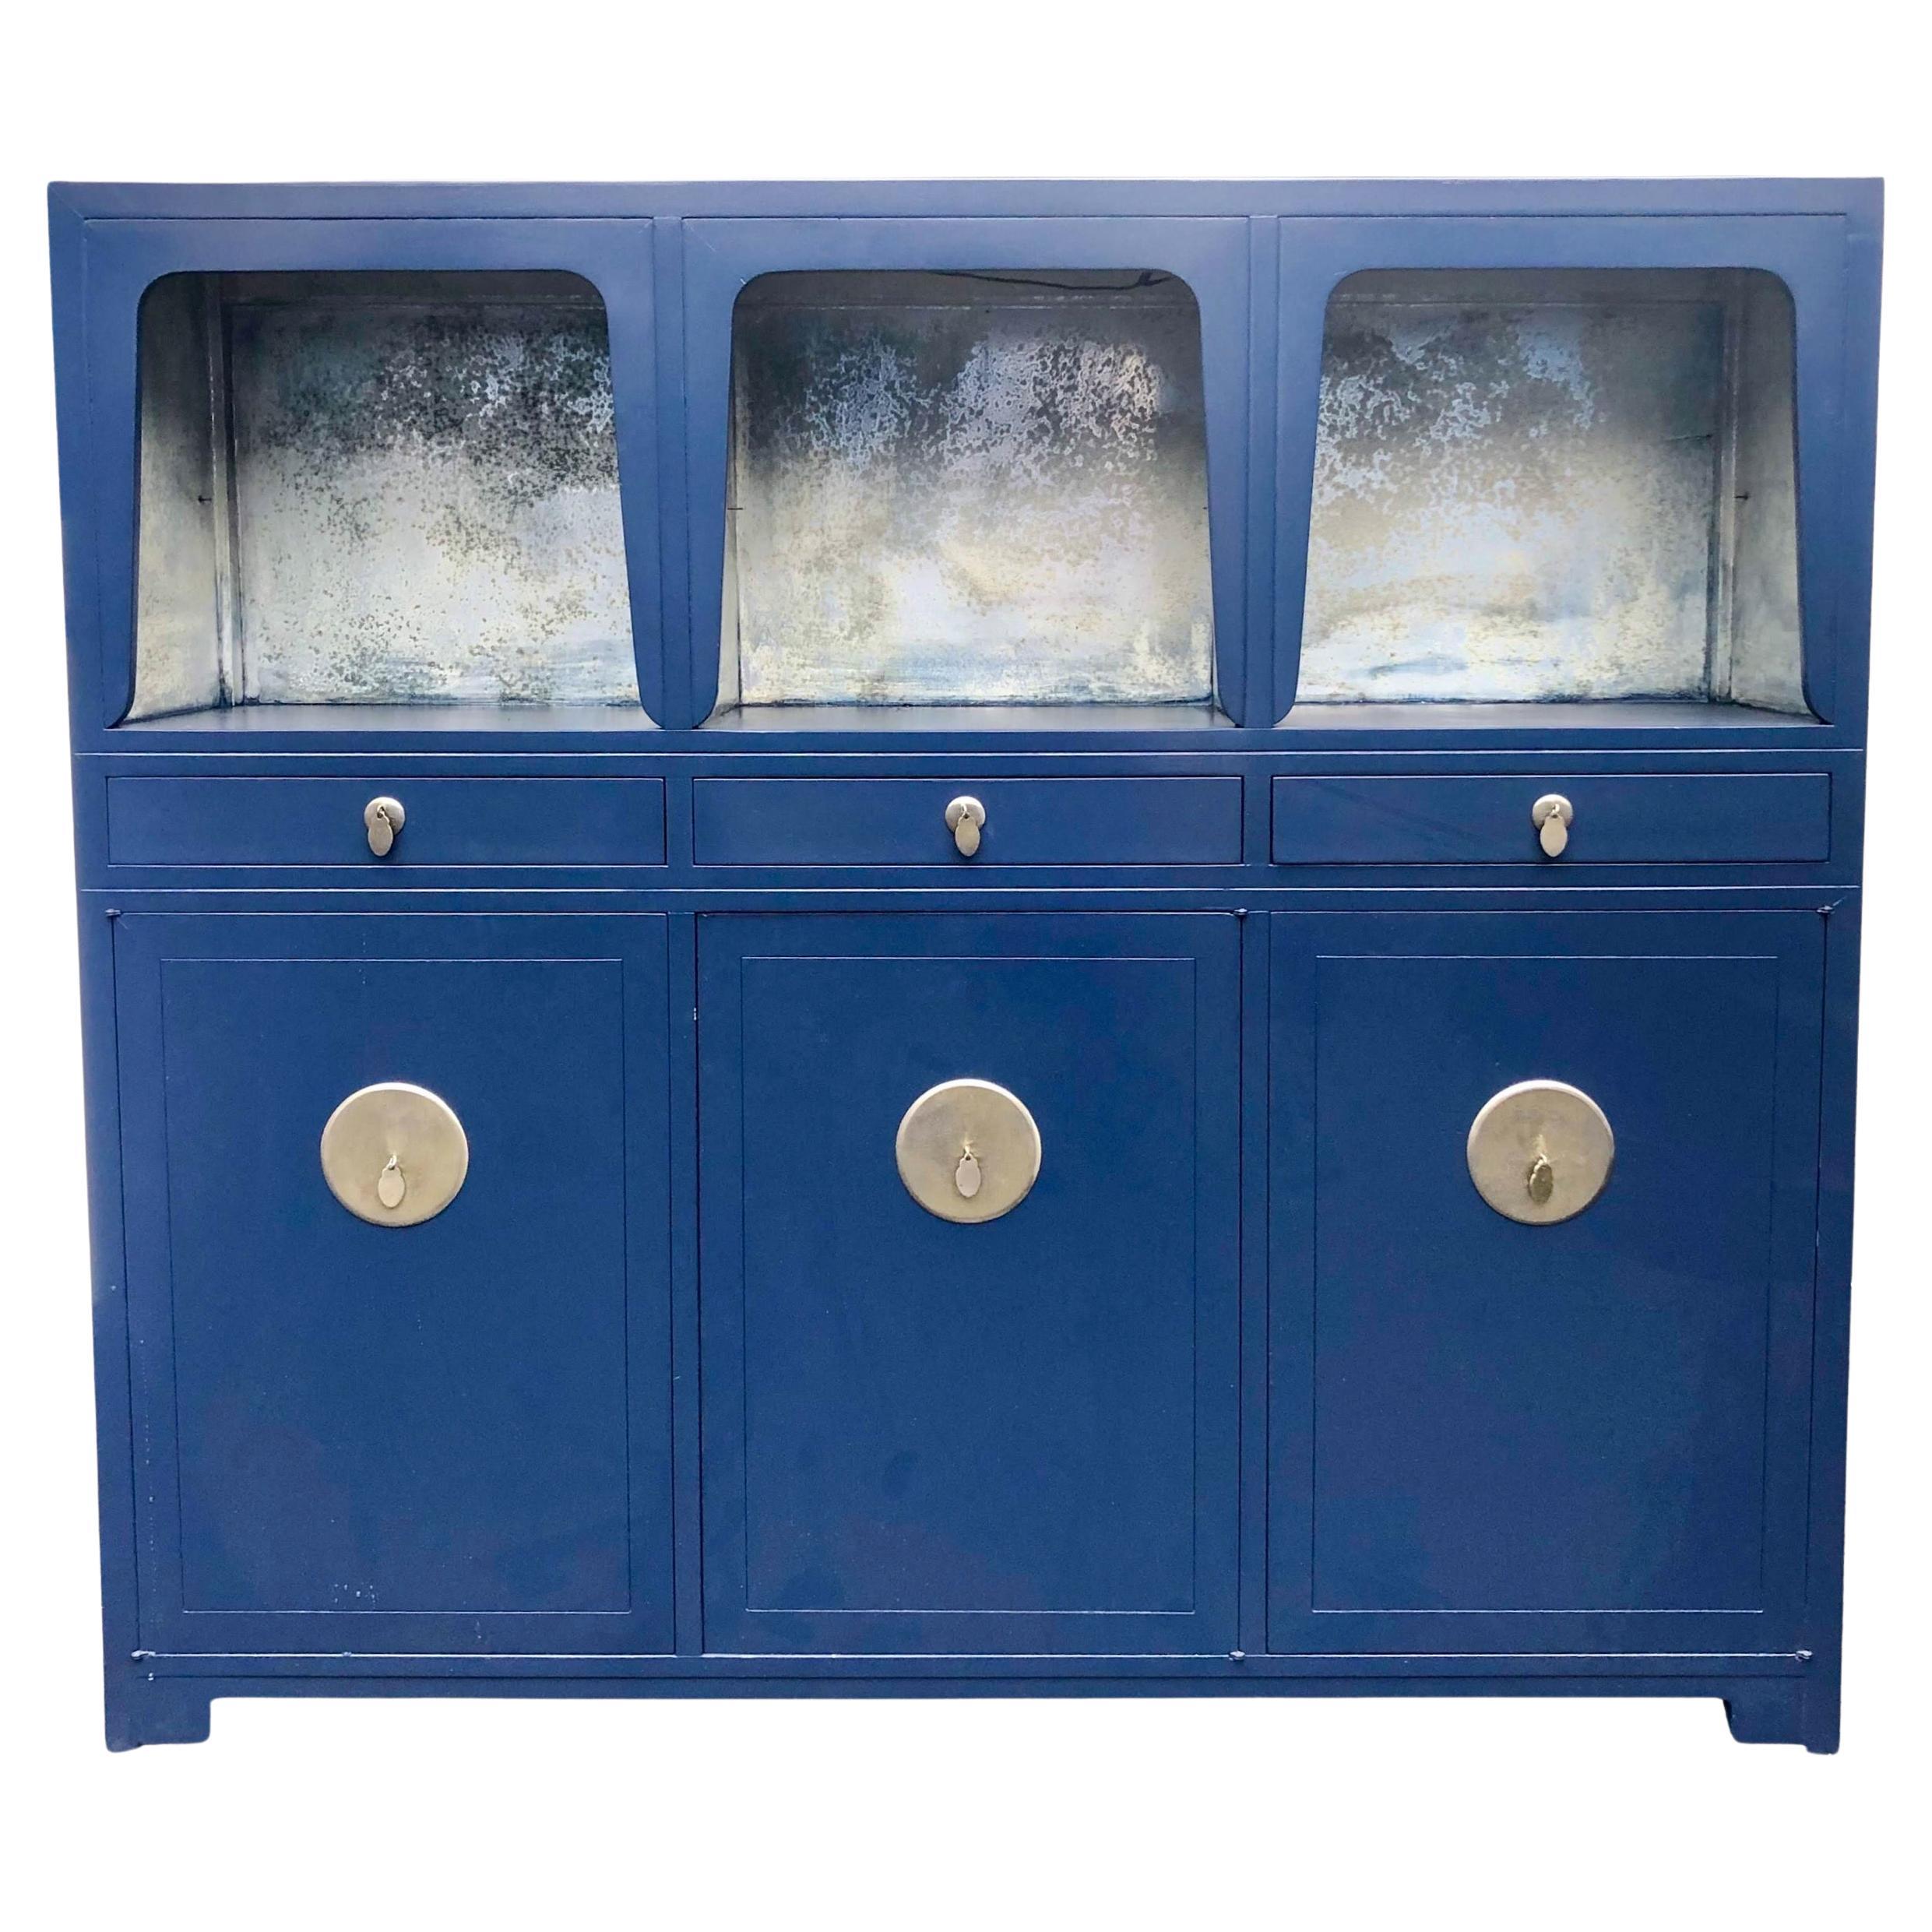 This is an Asian modern navy lacquered cabinet or credenza designed by Michael Taylor for Baker Furniture as part of his Far East Collection. The upper portion is silver leafed, while the base provides tremendous storage. 